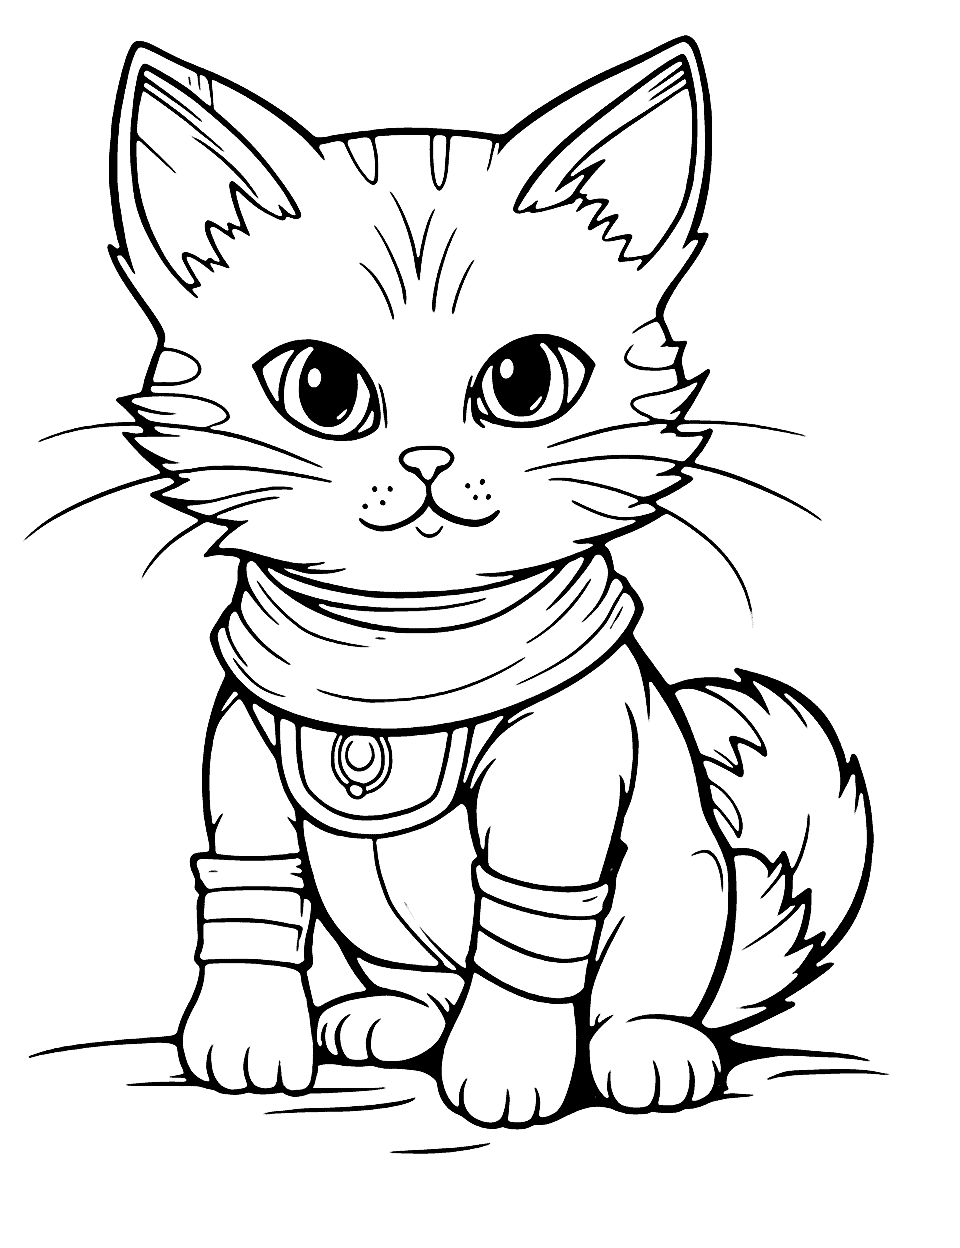 Anime-Style Cat Warrior Coloring Page - A brave cat warrior in anime style, equipped with armor.